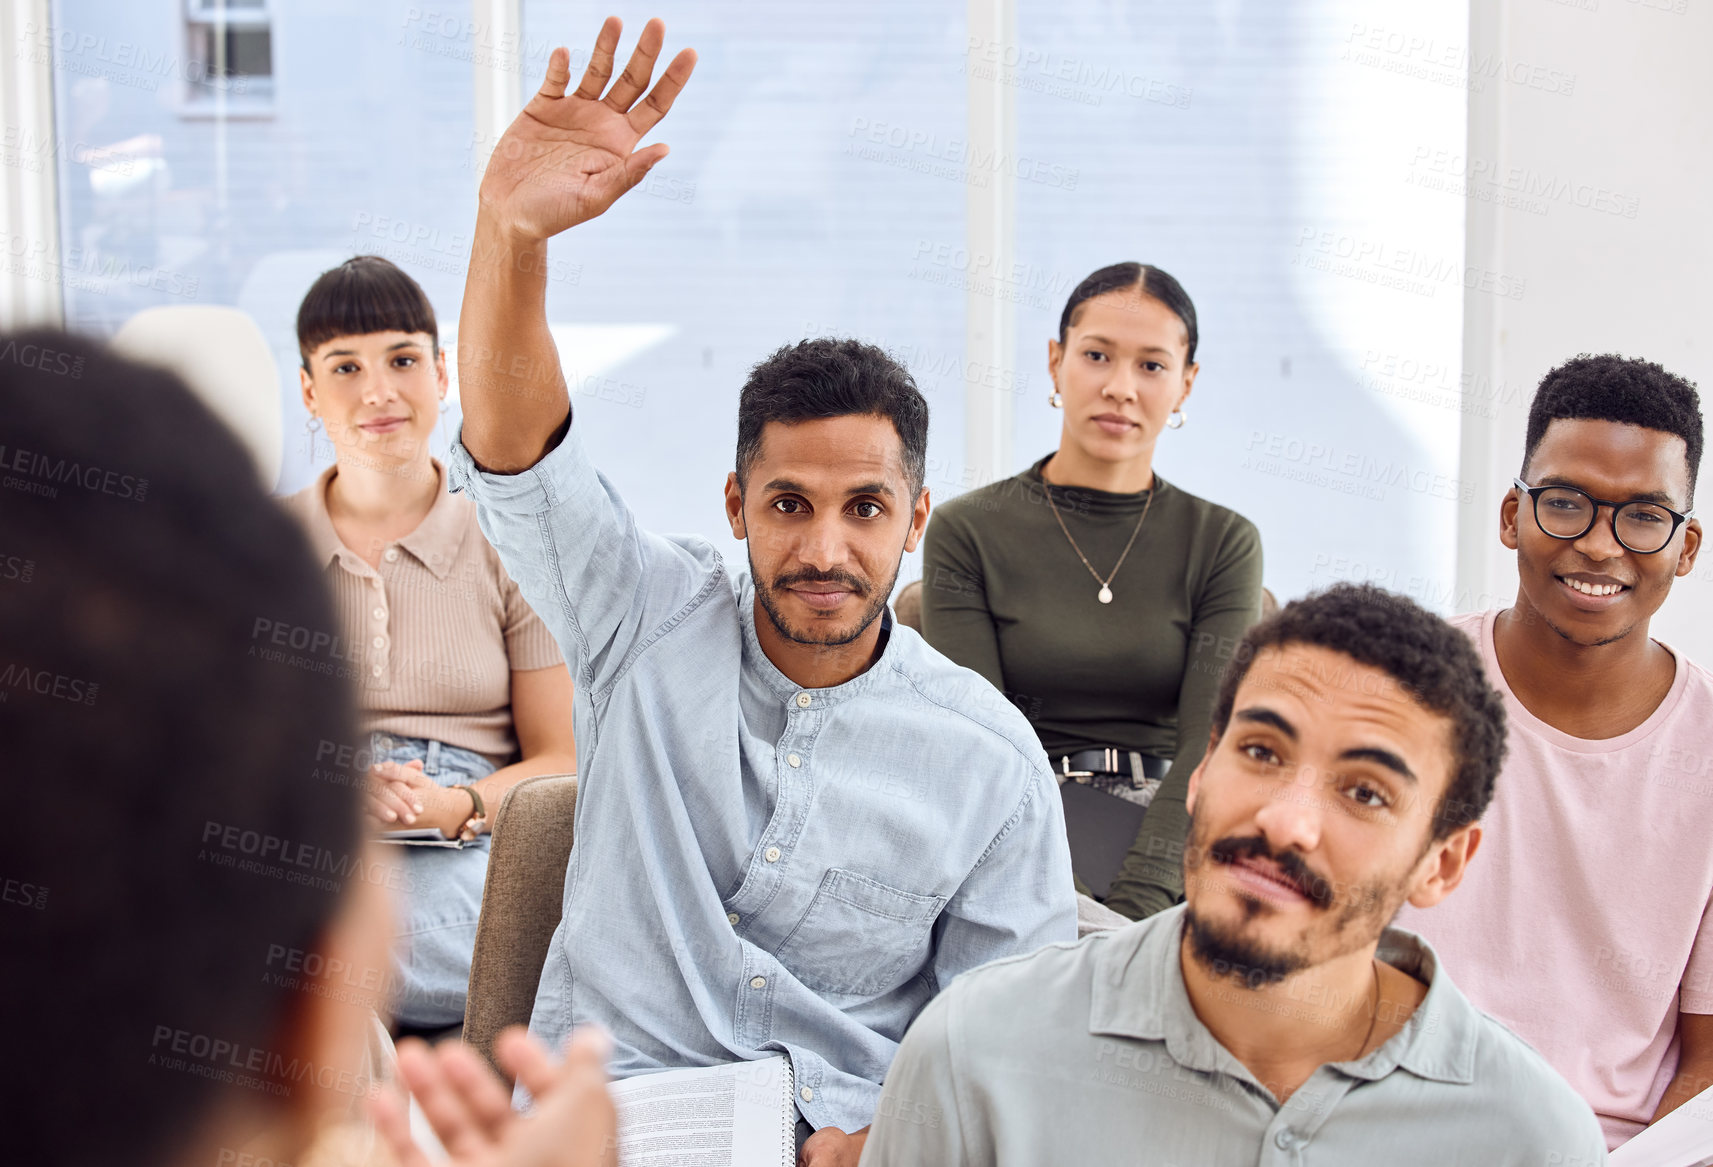 Buy stock photo Shot of a young businessman raising his hand during a presentation in an office